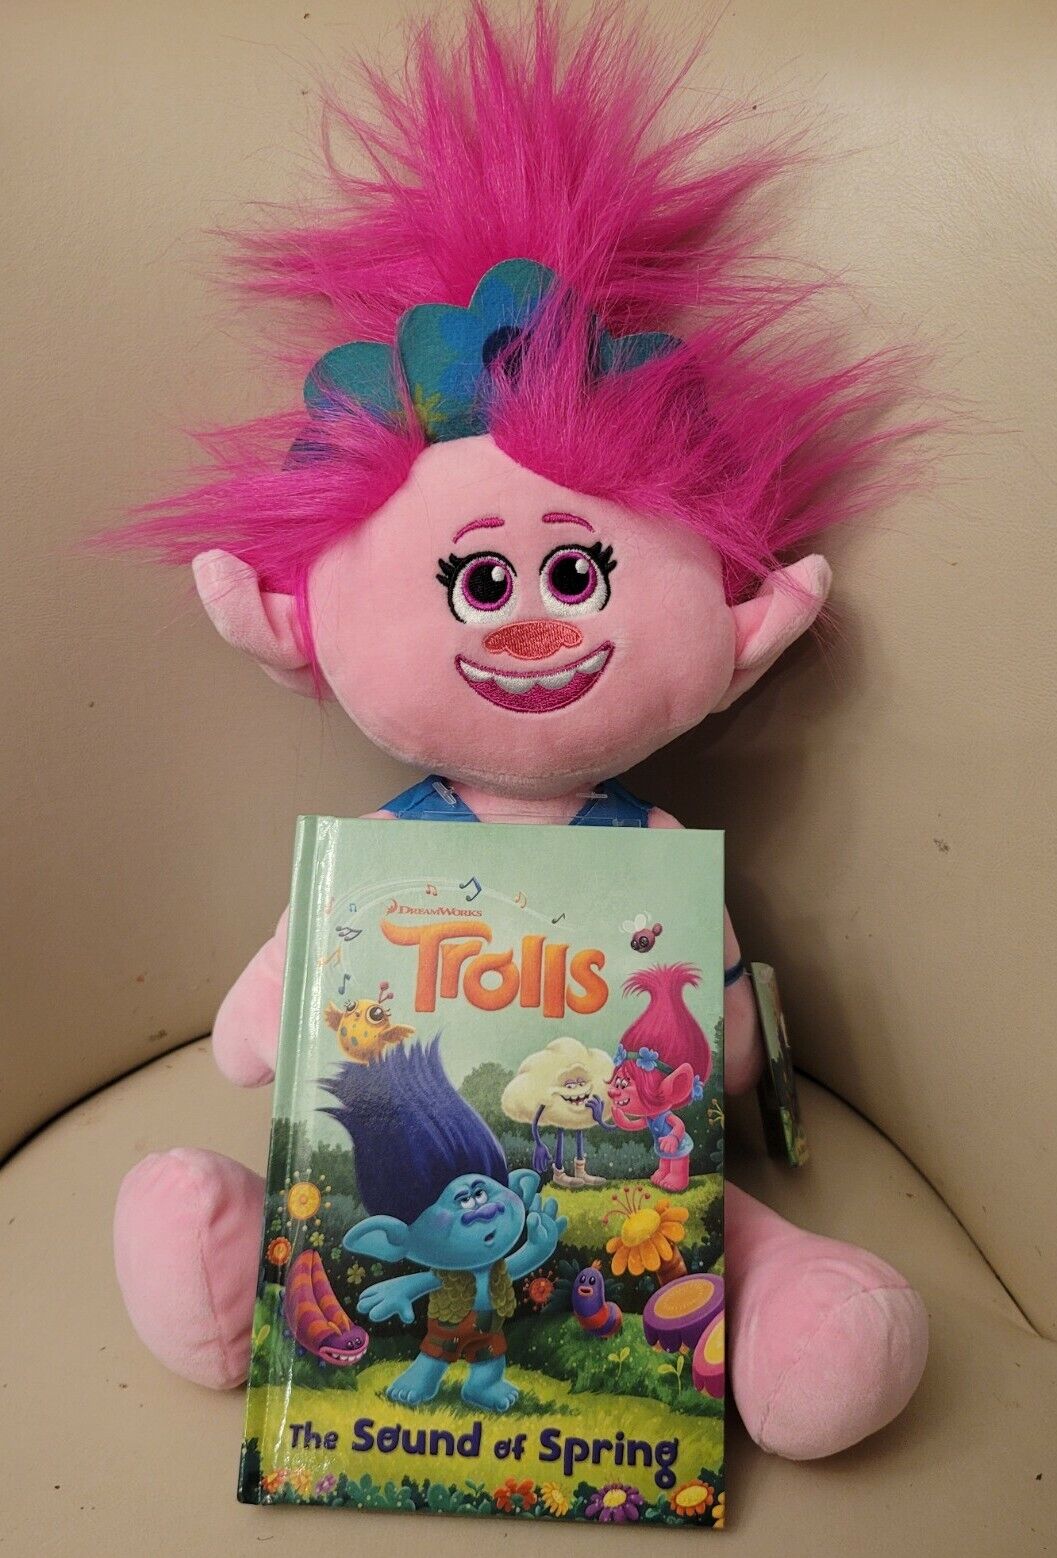 Kohls Cares TROLLS POPPY 18" Plush with book "The SOUND of SPRING" 2021 NEW